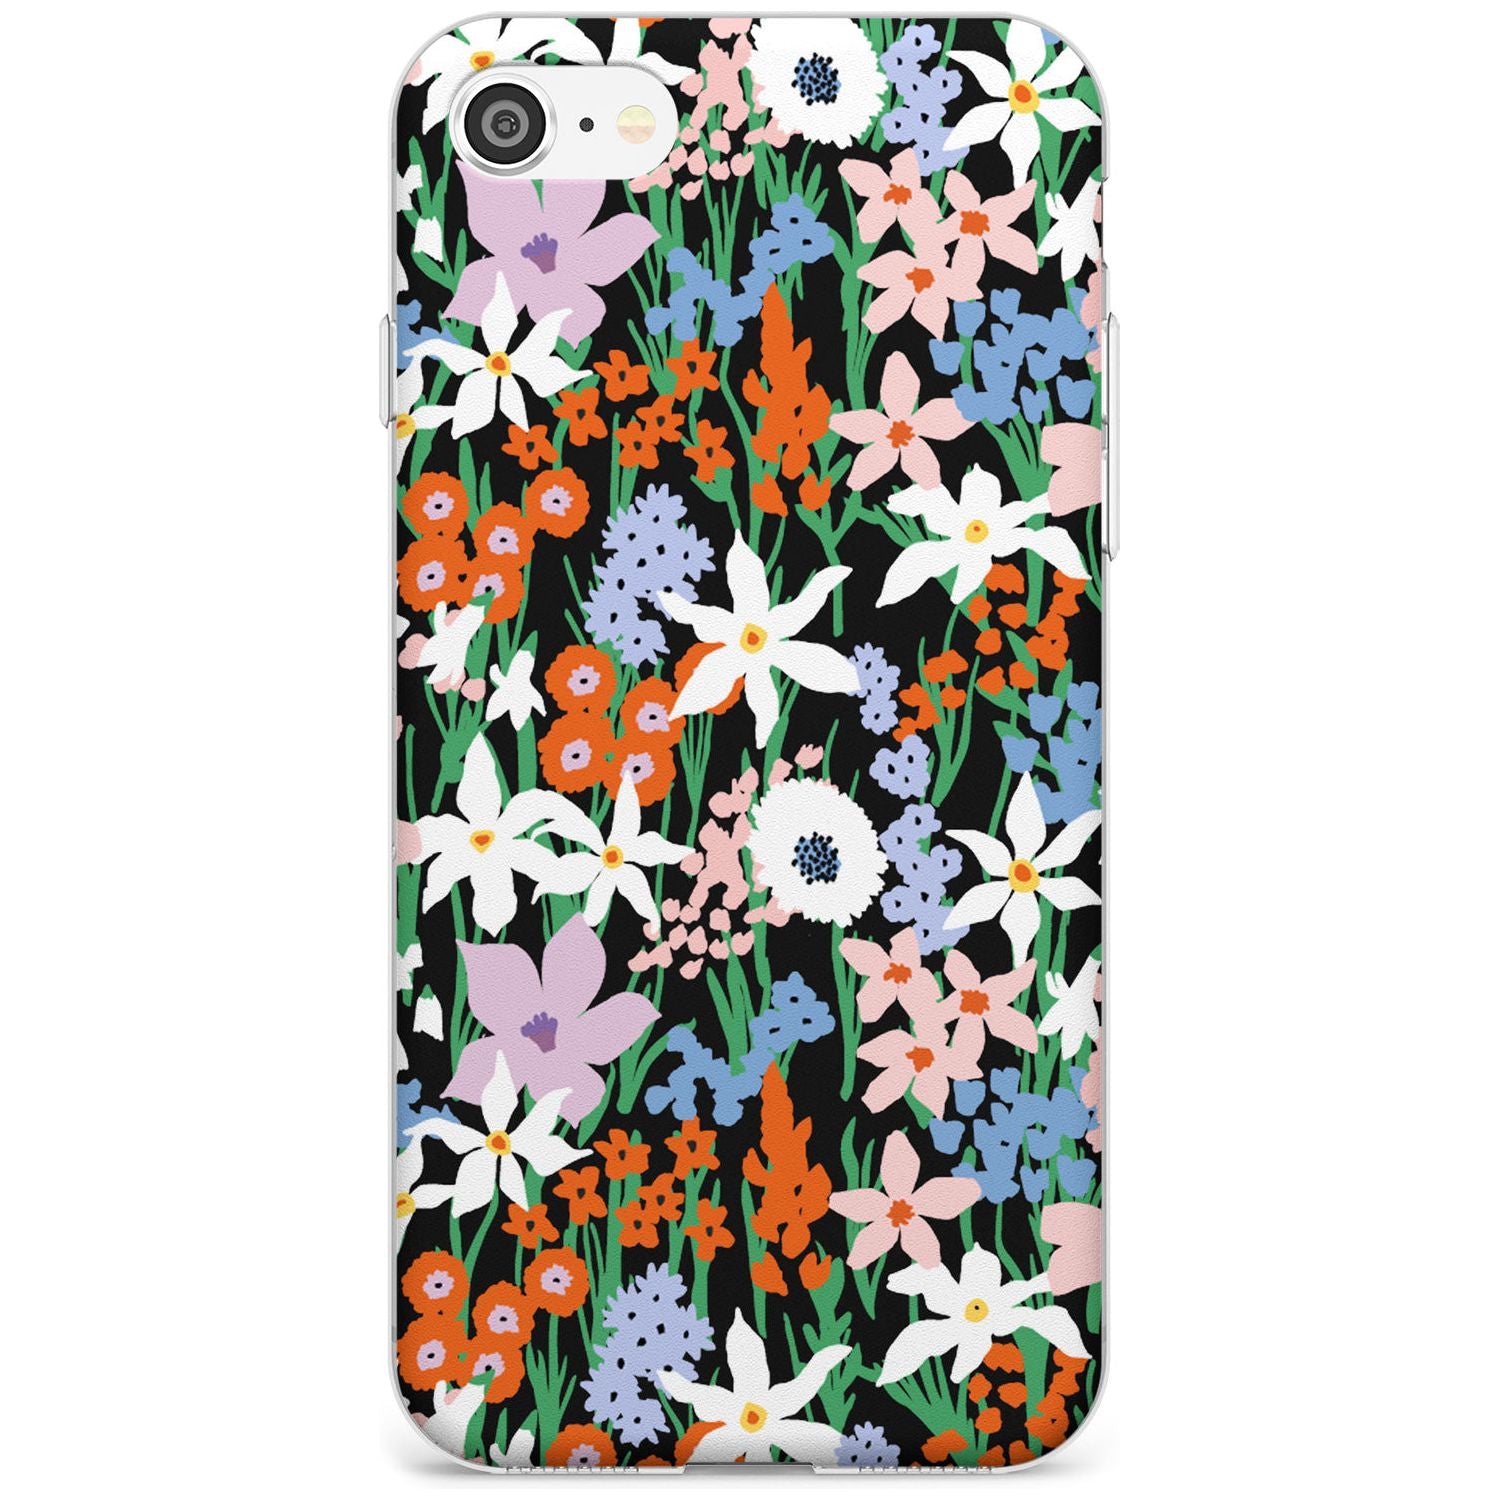 Springtime Meadow: Solid Black Impact Phone Case for iPhone SE 8 7 Plus